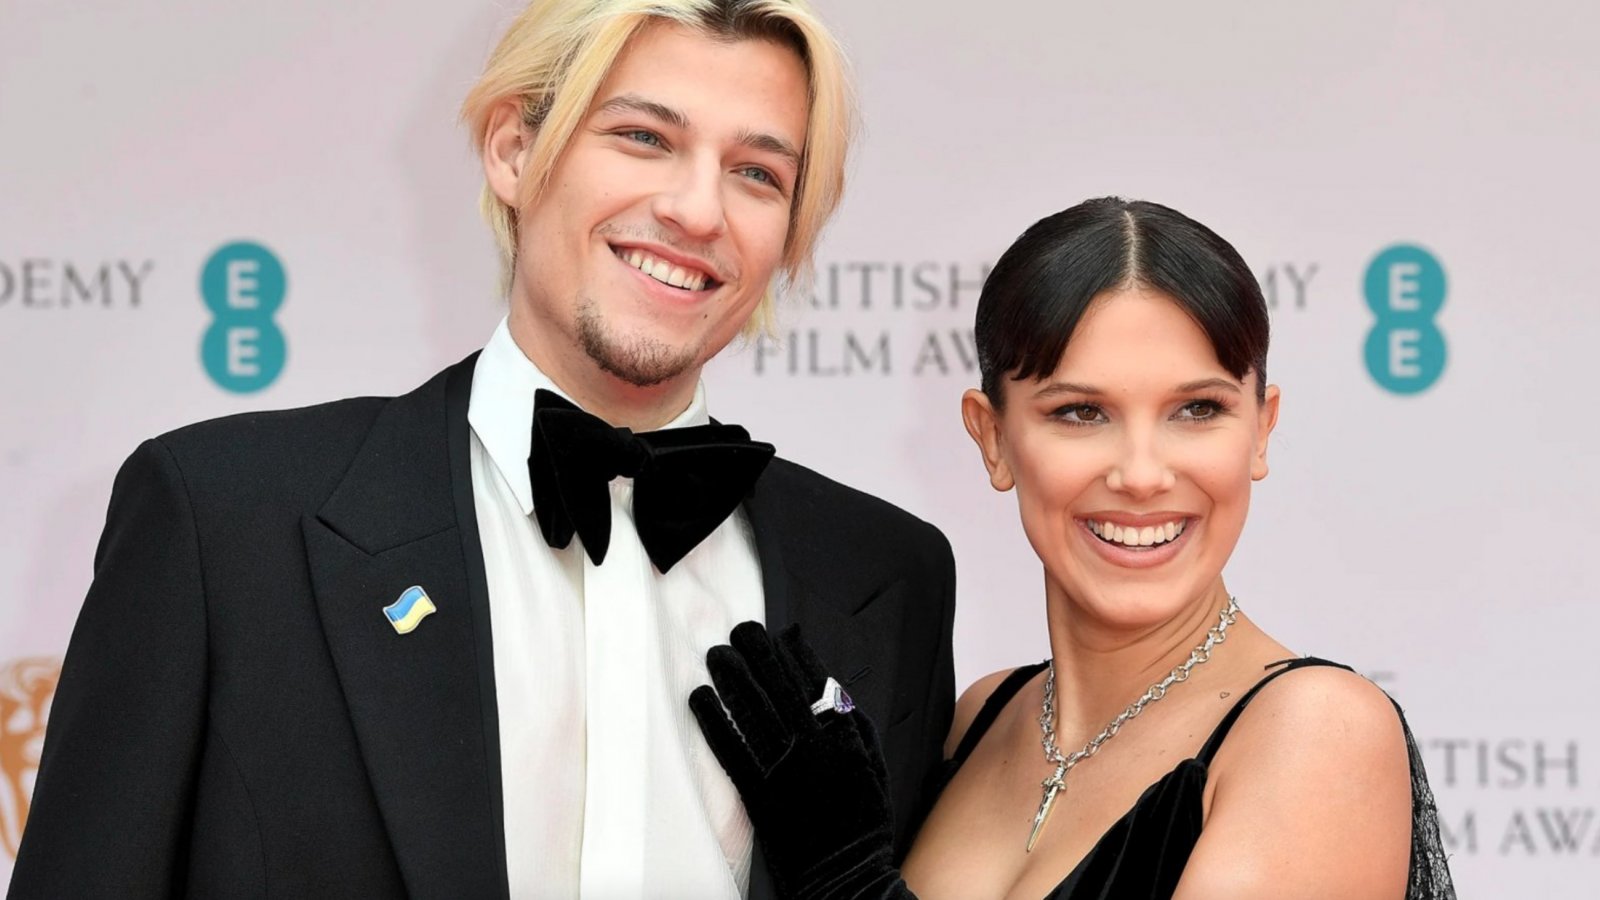 Millie Bobby Brown, Jon Bon Jovi comment on the news of the wedding with the son: "I don't know if age matters"